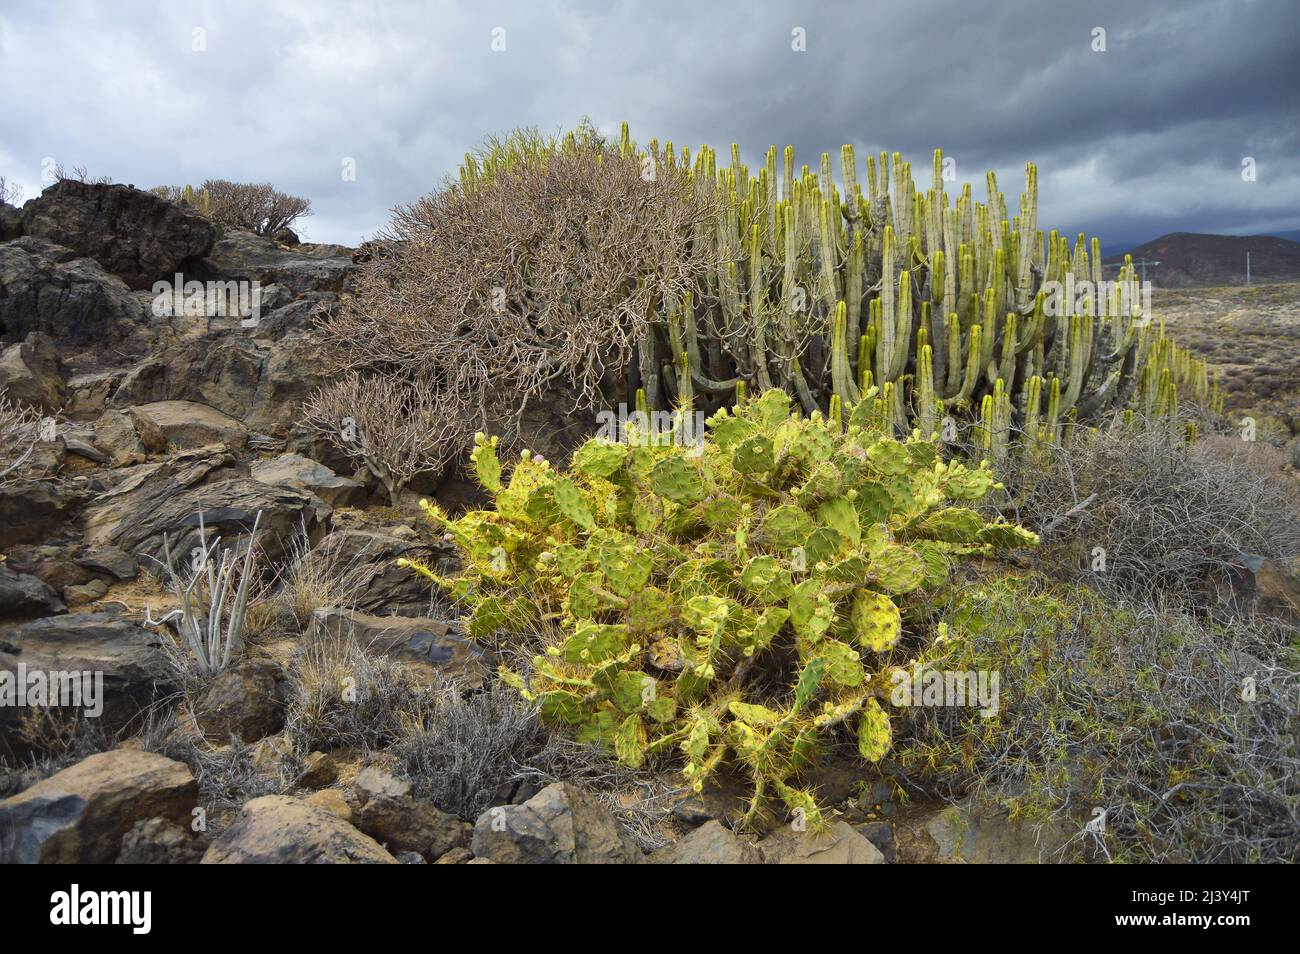 Opuntia dillenii (Prickly pear) and Euphorbia canariensis (Canary Island Spurge) growing in the arid volcanic landscape of Tenerife south. Stock Photo